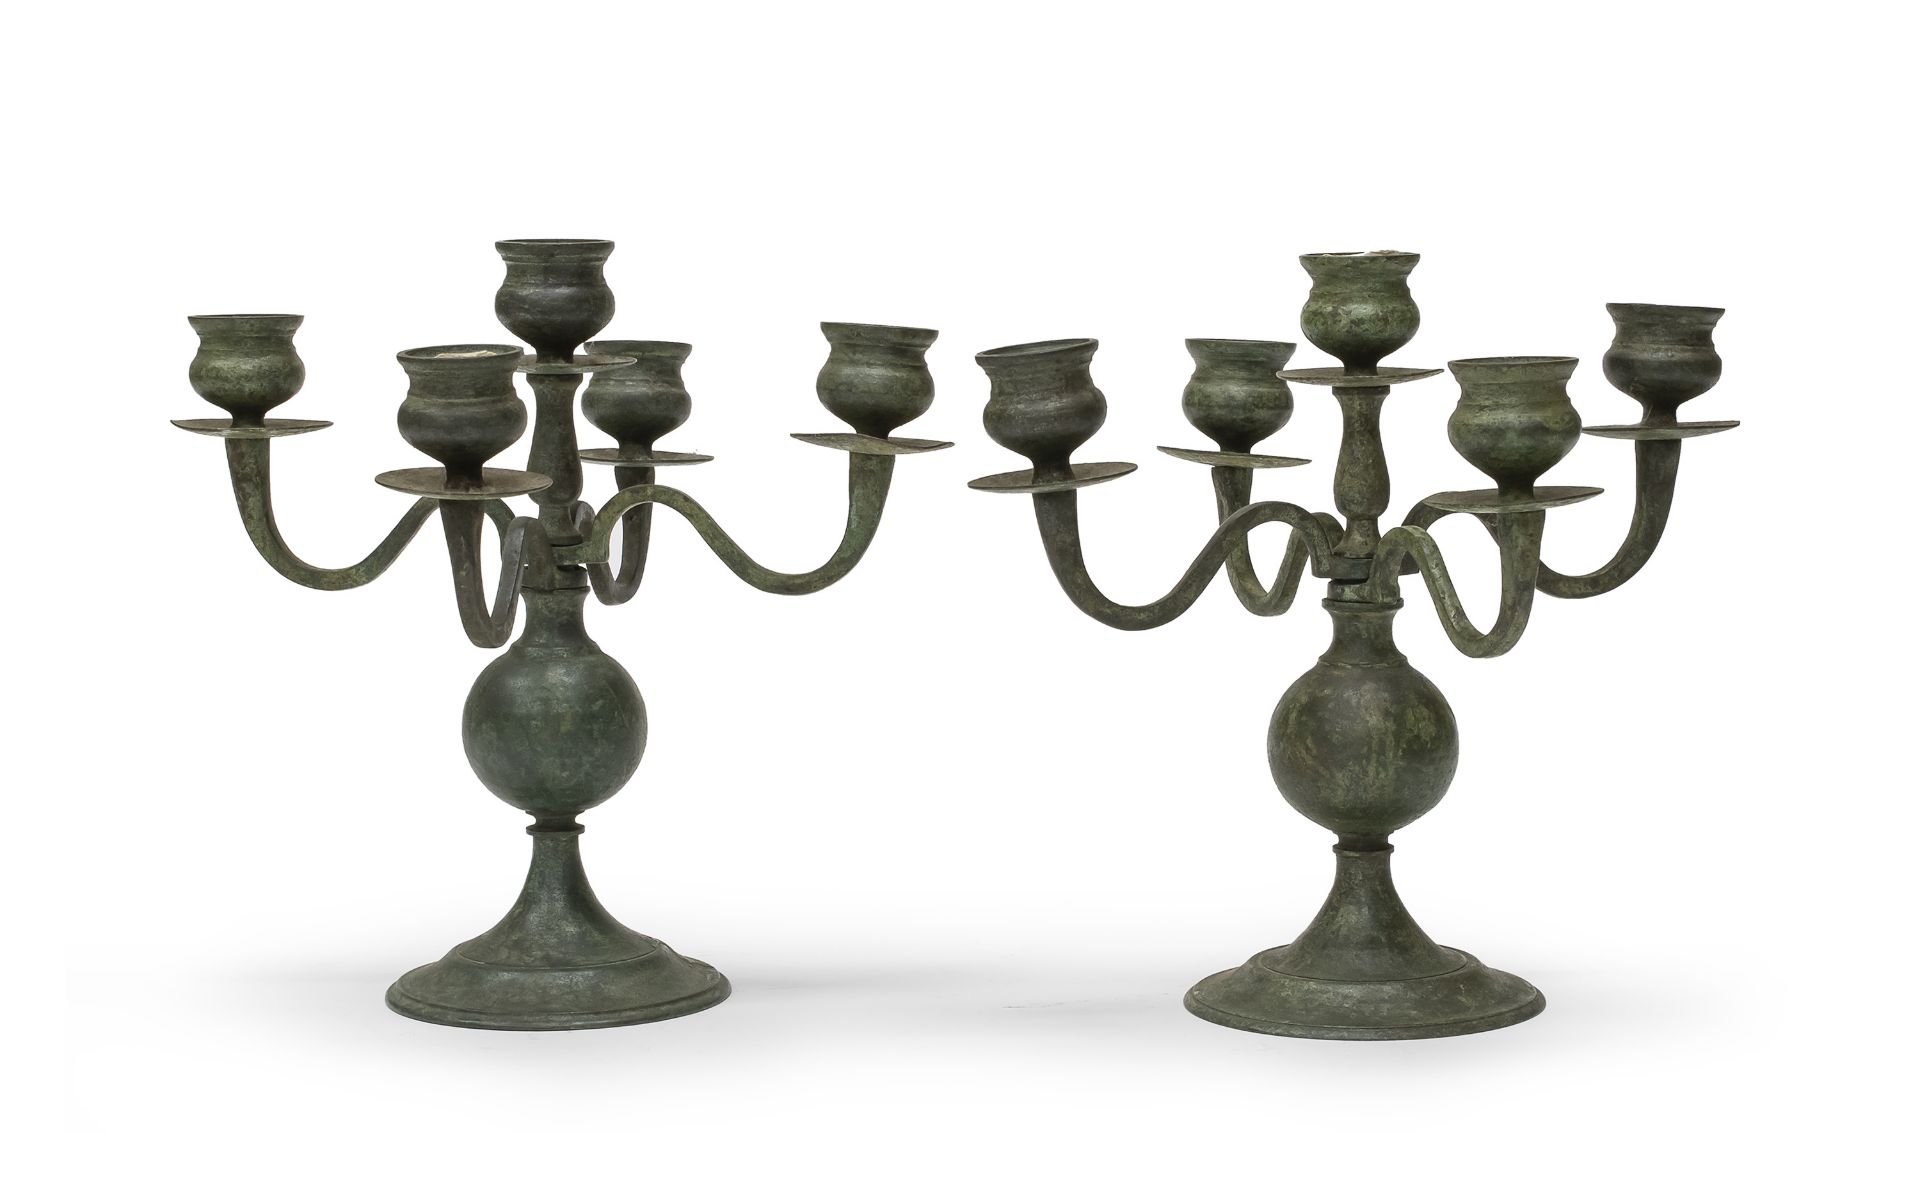 A PAIR OF SMALL INDIAN BRONZE CANDLESTICKS. EARLY 20TH CENTURY.